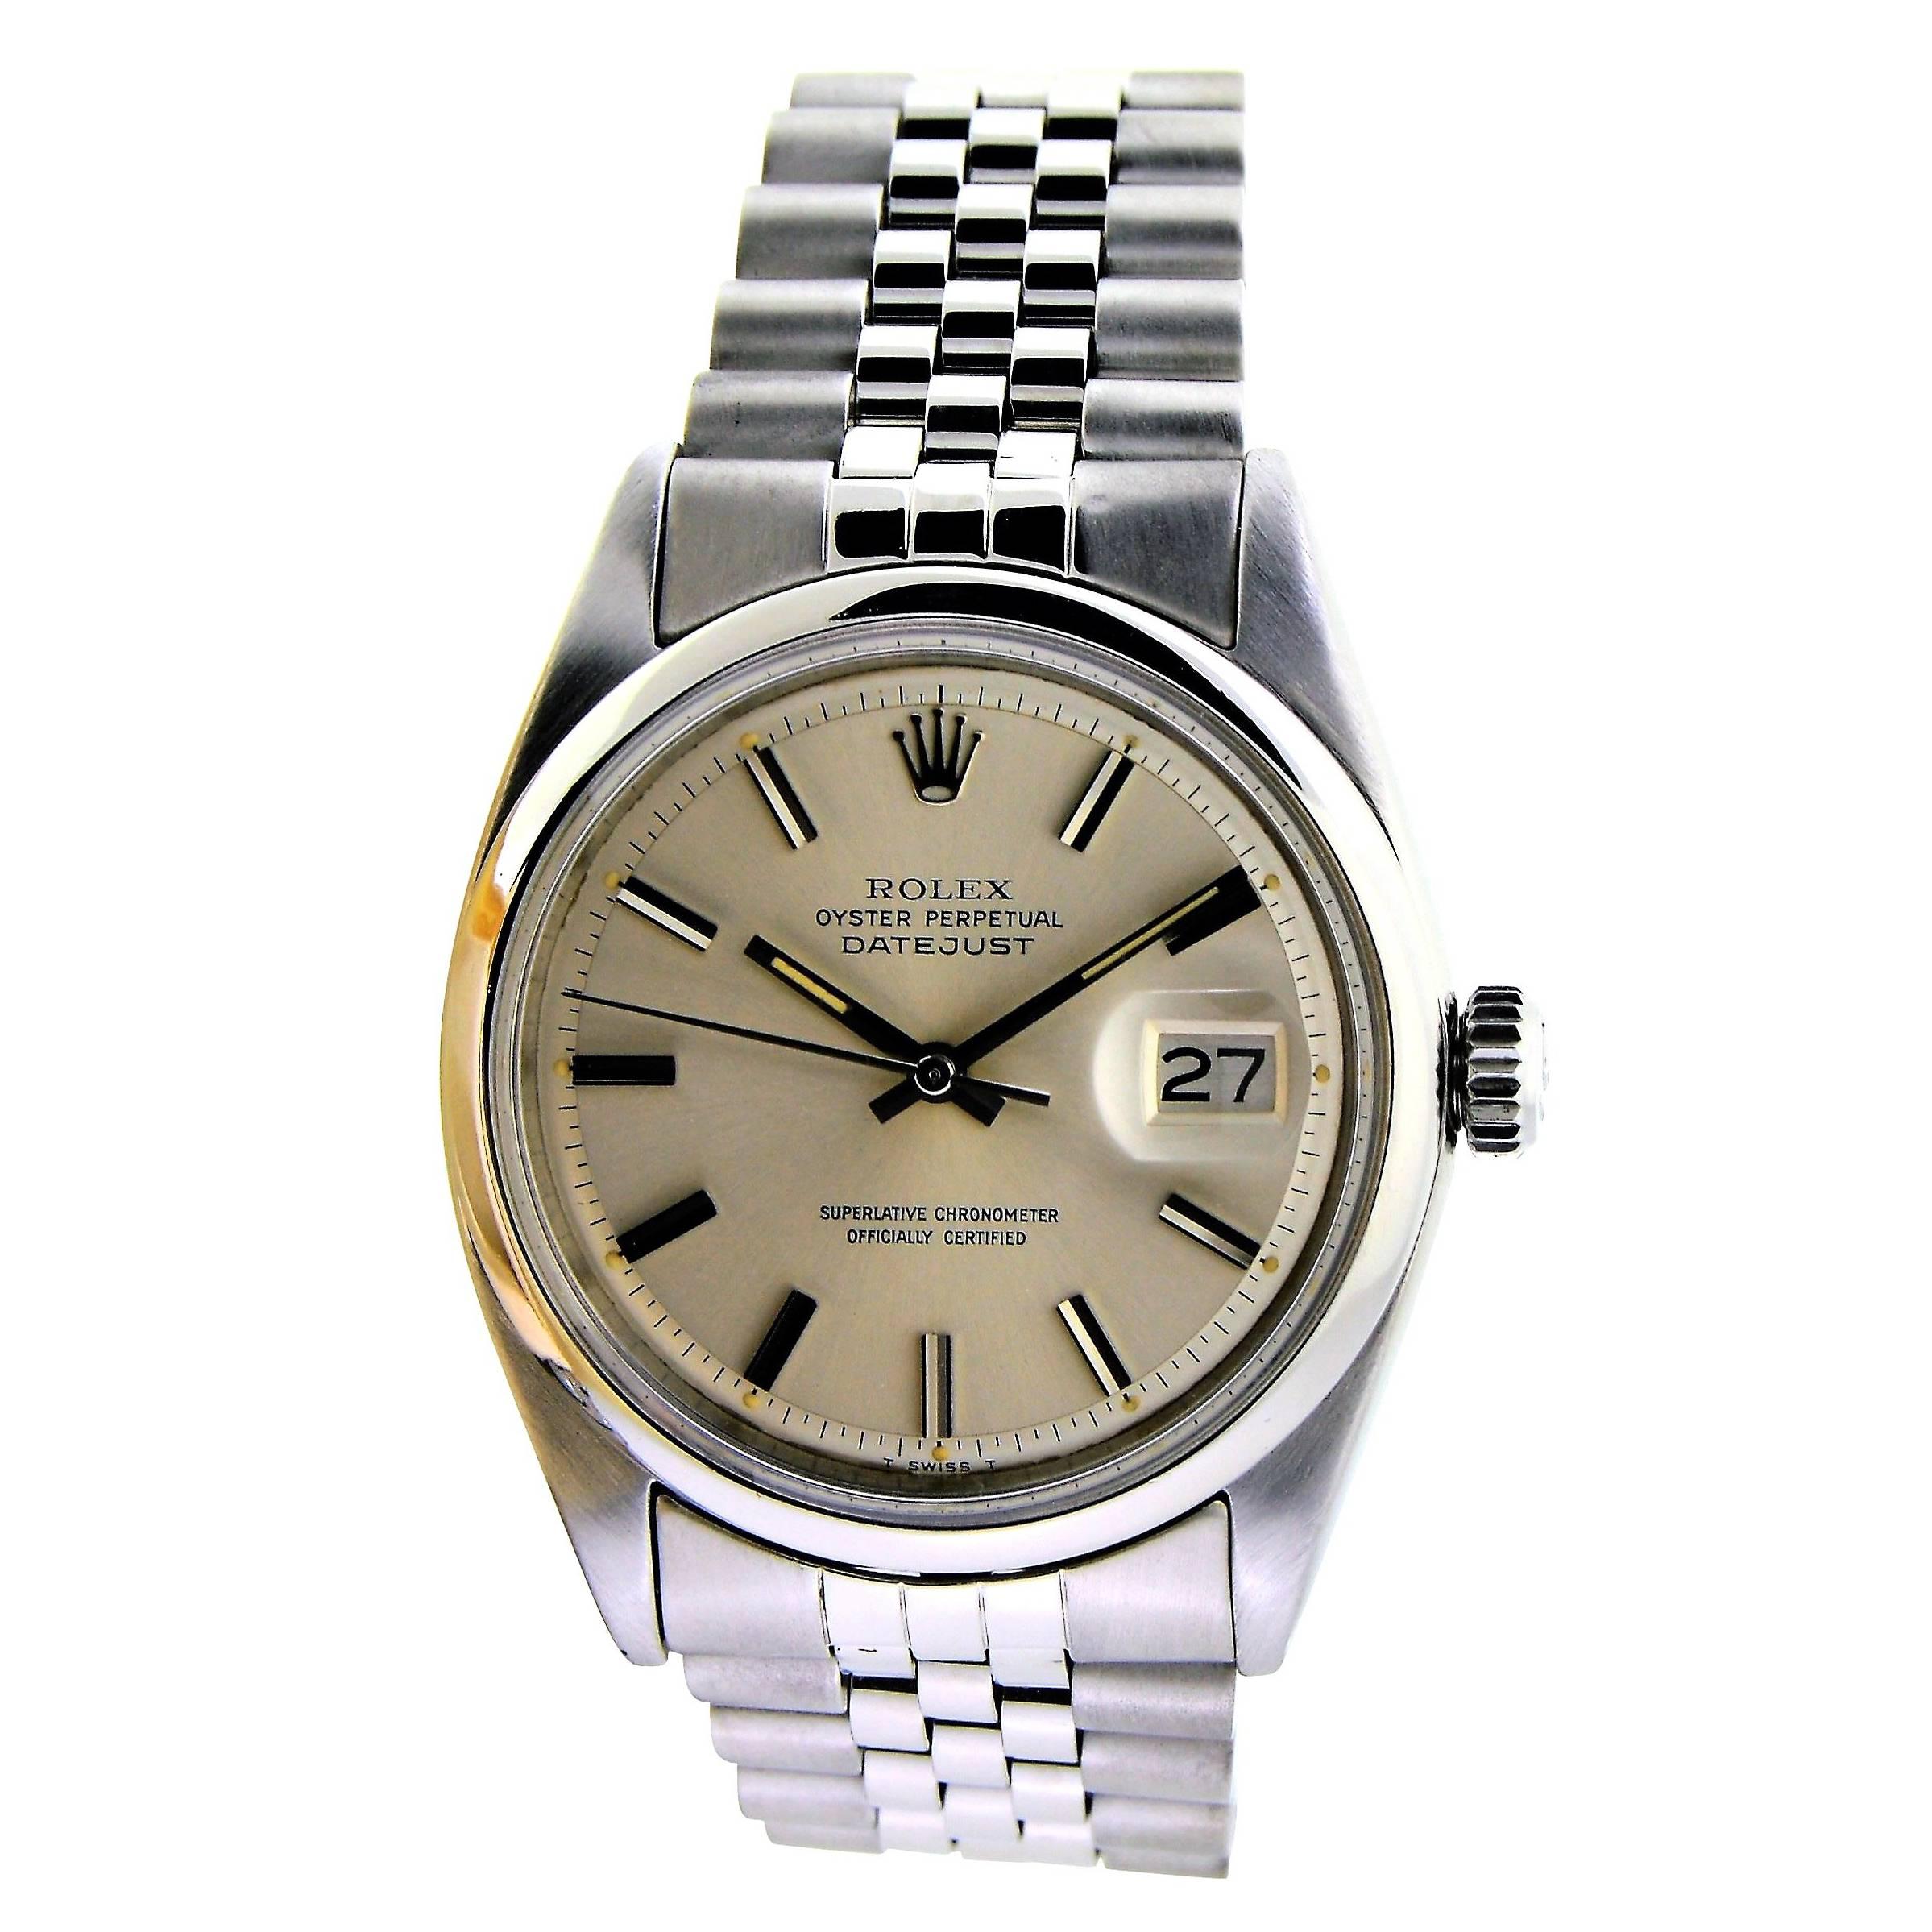 Rolex Stainless Steel Datejust Polished Bezel Watch circa 1969 or 70